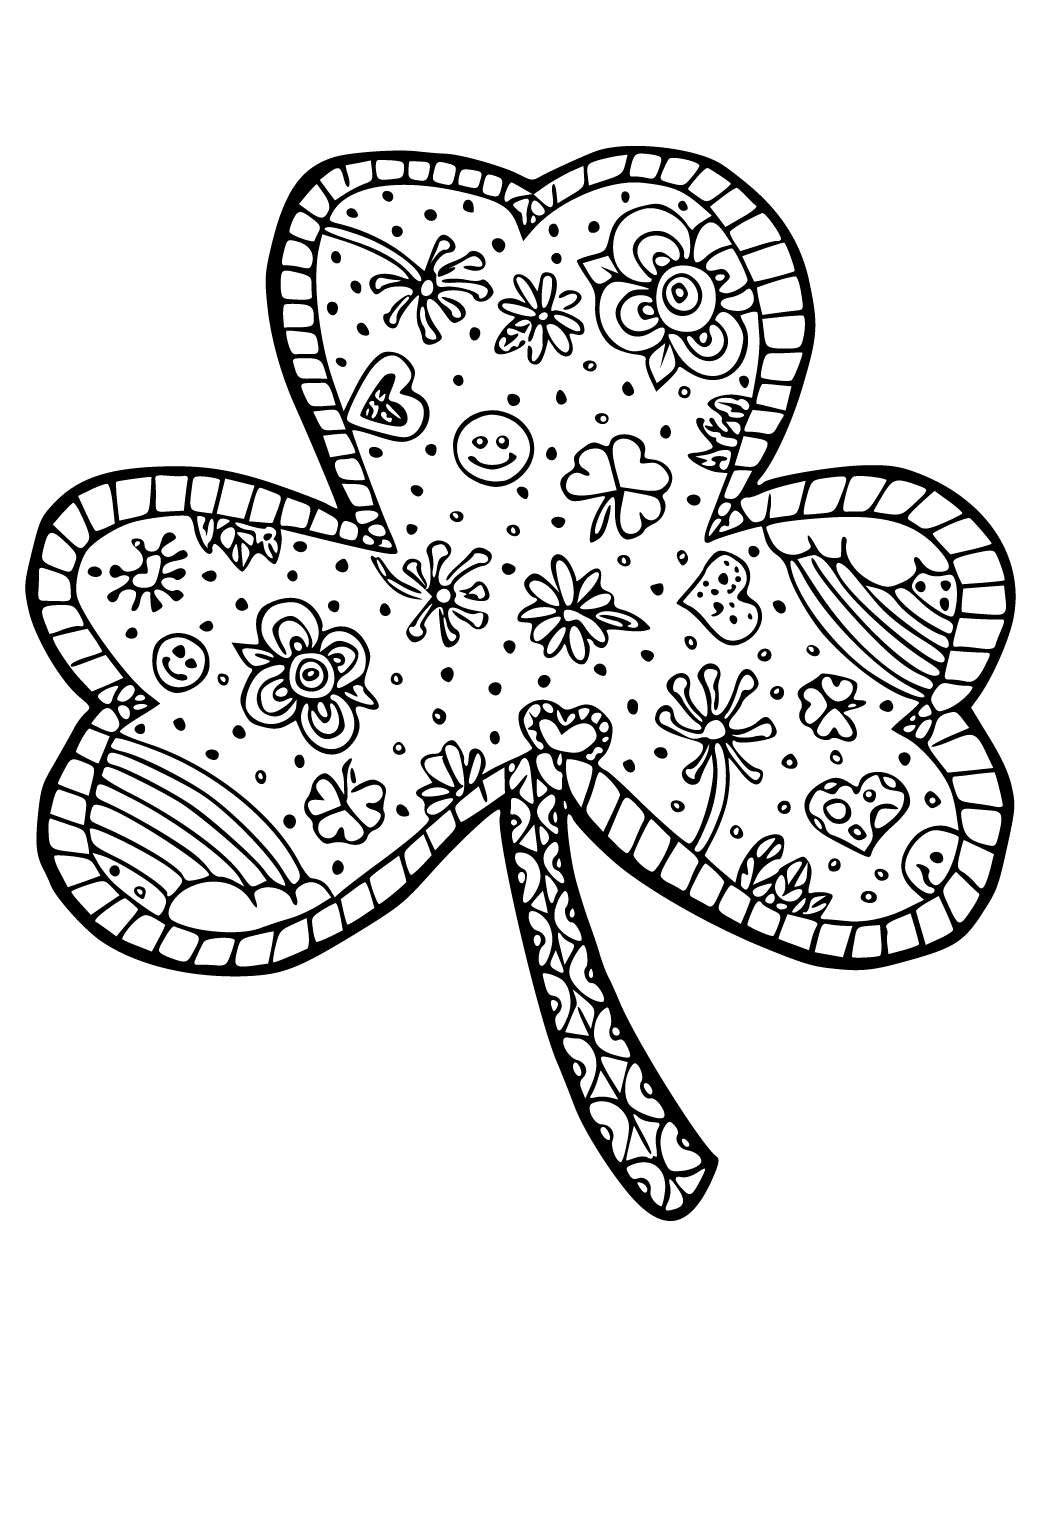 Free printable shamrock pattern coloring page for adults and kids